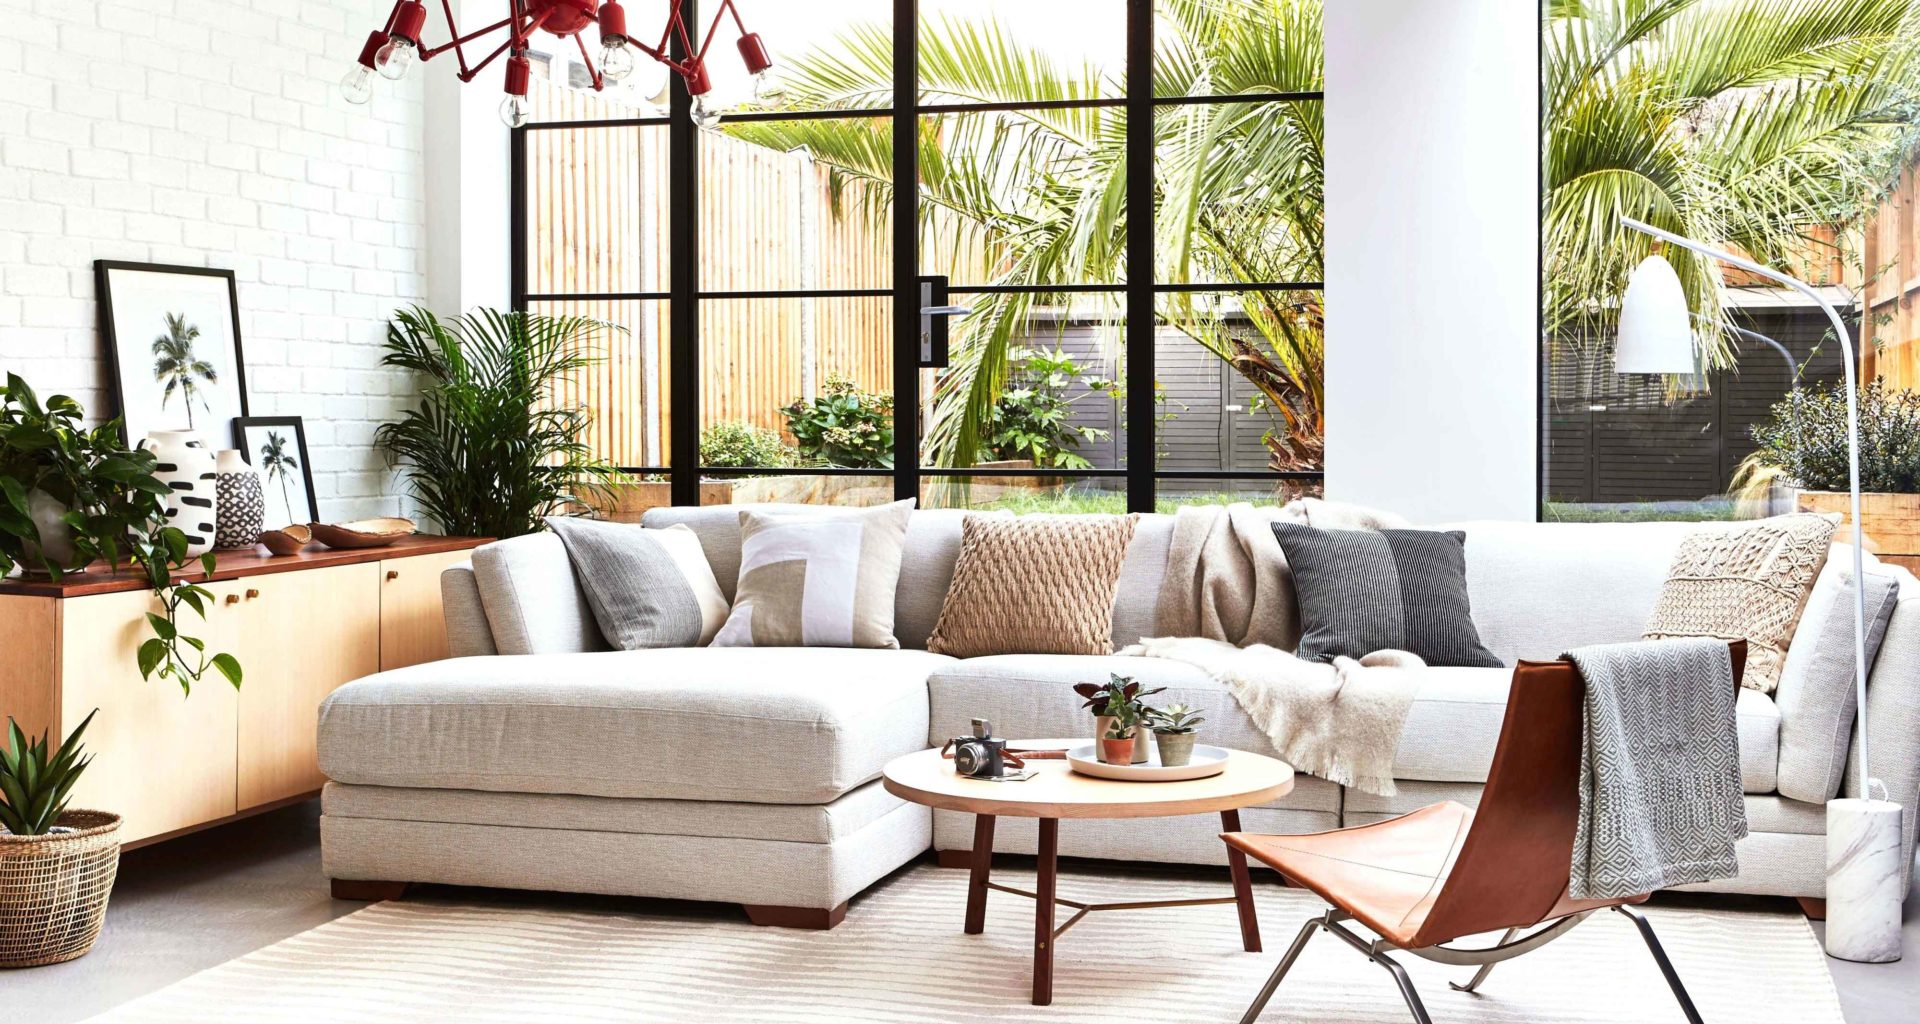 5 Couch Styles For Your Living Room From Boho To Industrial